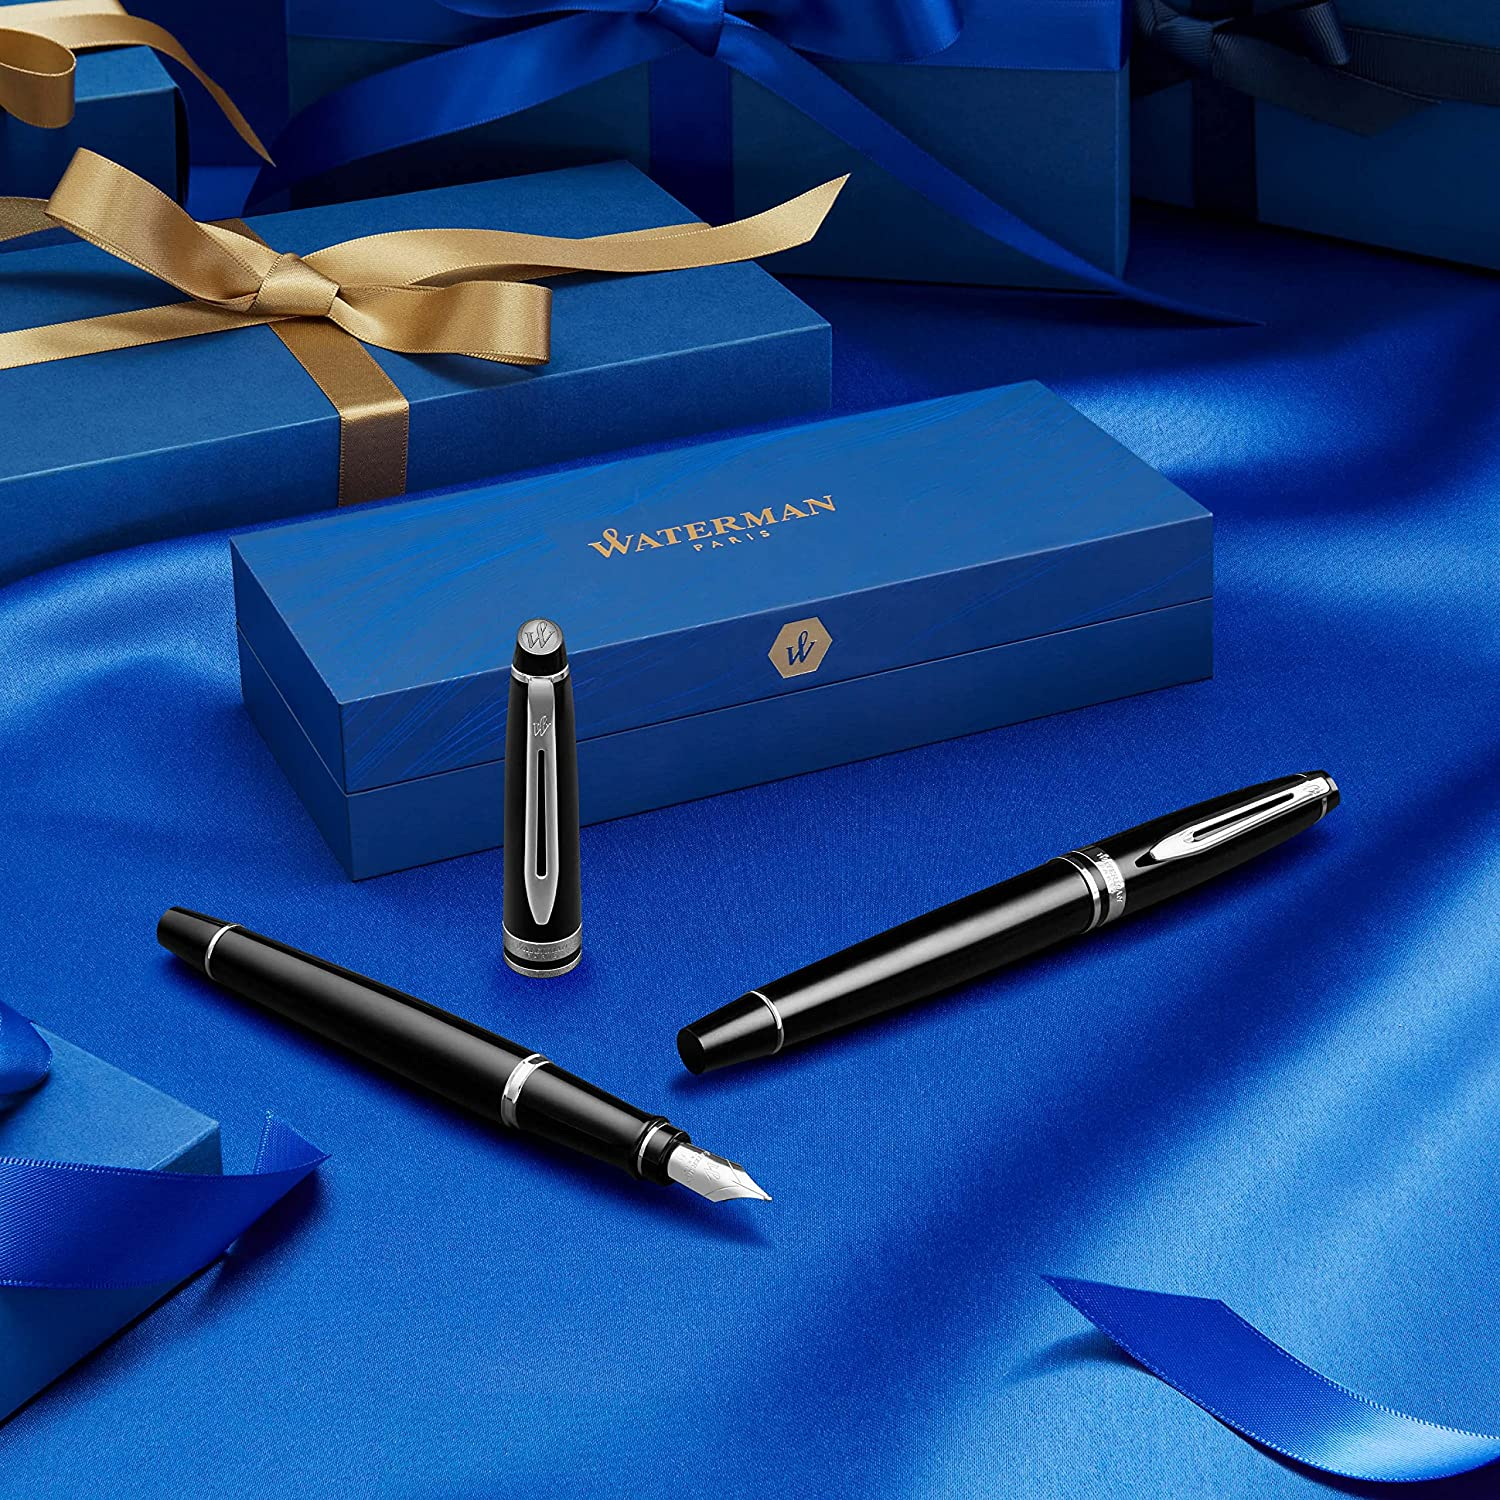 The Expert Fountain pen is a masterpiece of elegance and craftsmanship derived from a longstanding tradition of Waterman legends